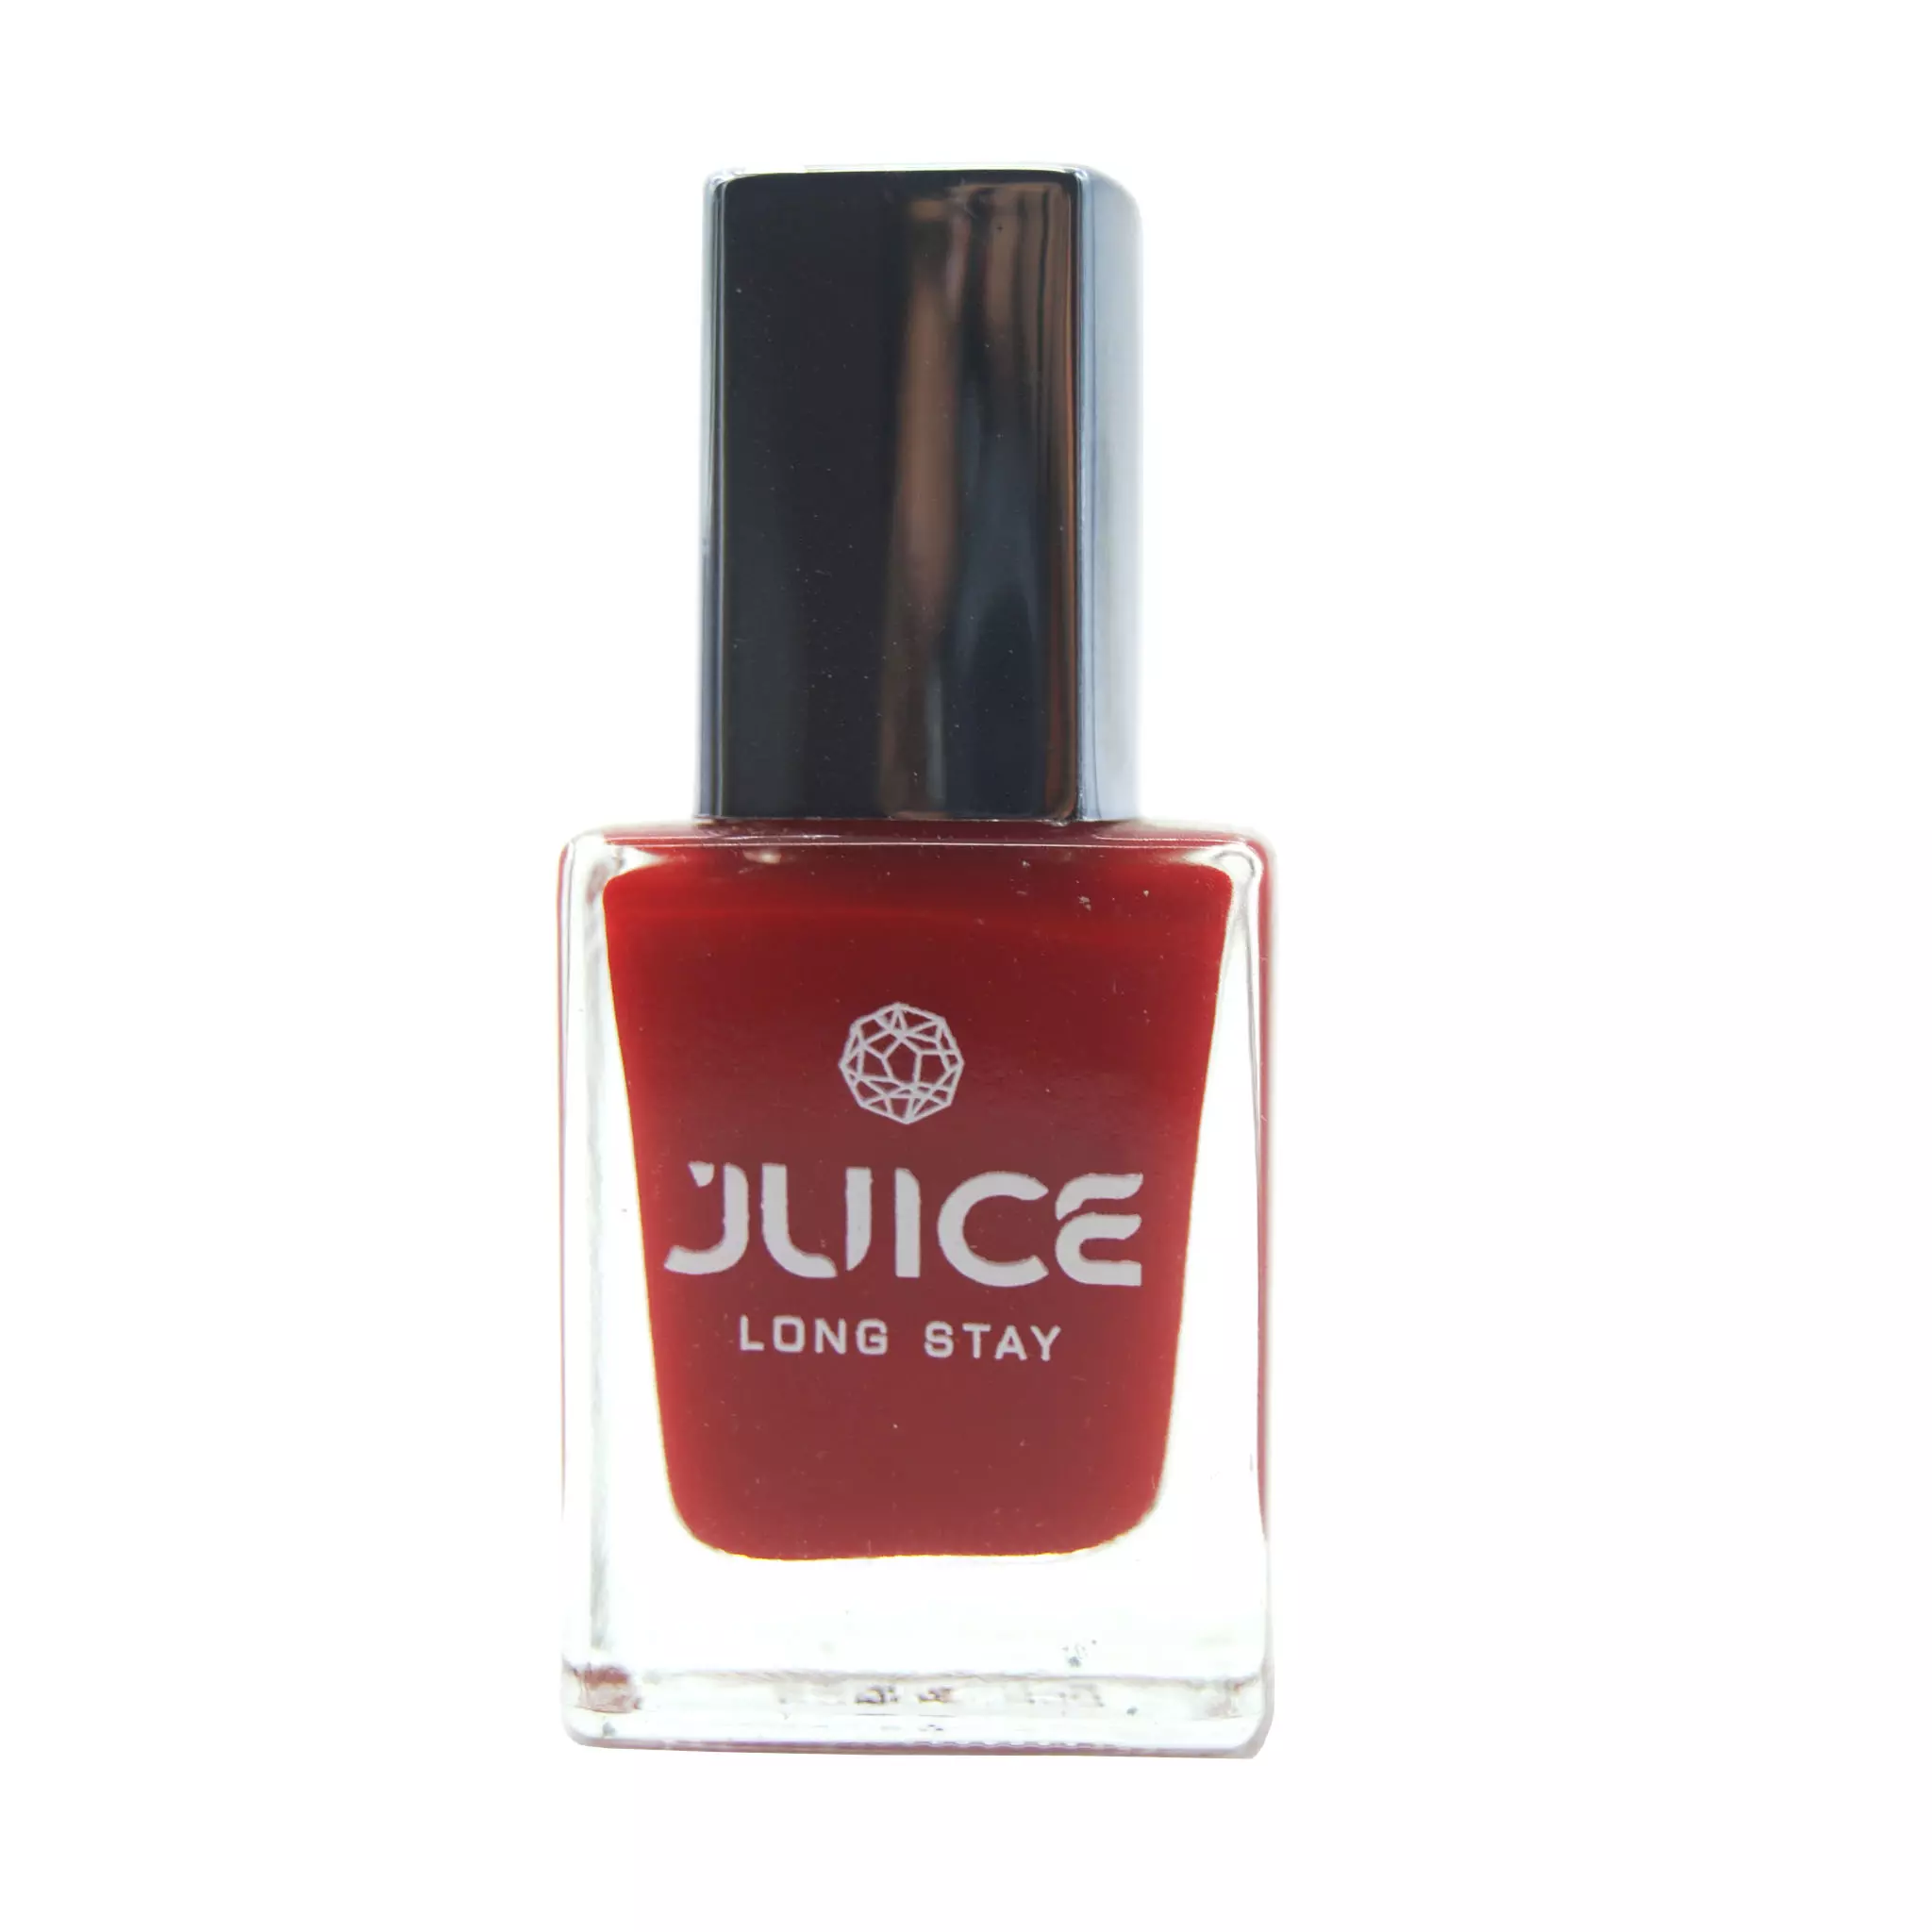 Juice Nail Polish Pack of 5 Periwinkle Blue - 81 / Dusty Coral - 102 /  Thunder Sky - 252 / Icy Pink - 287/ Teddy Brown - 288 NUDE COMBO_20, New